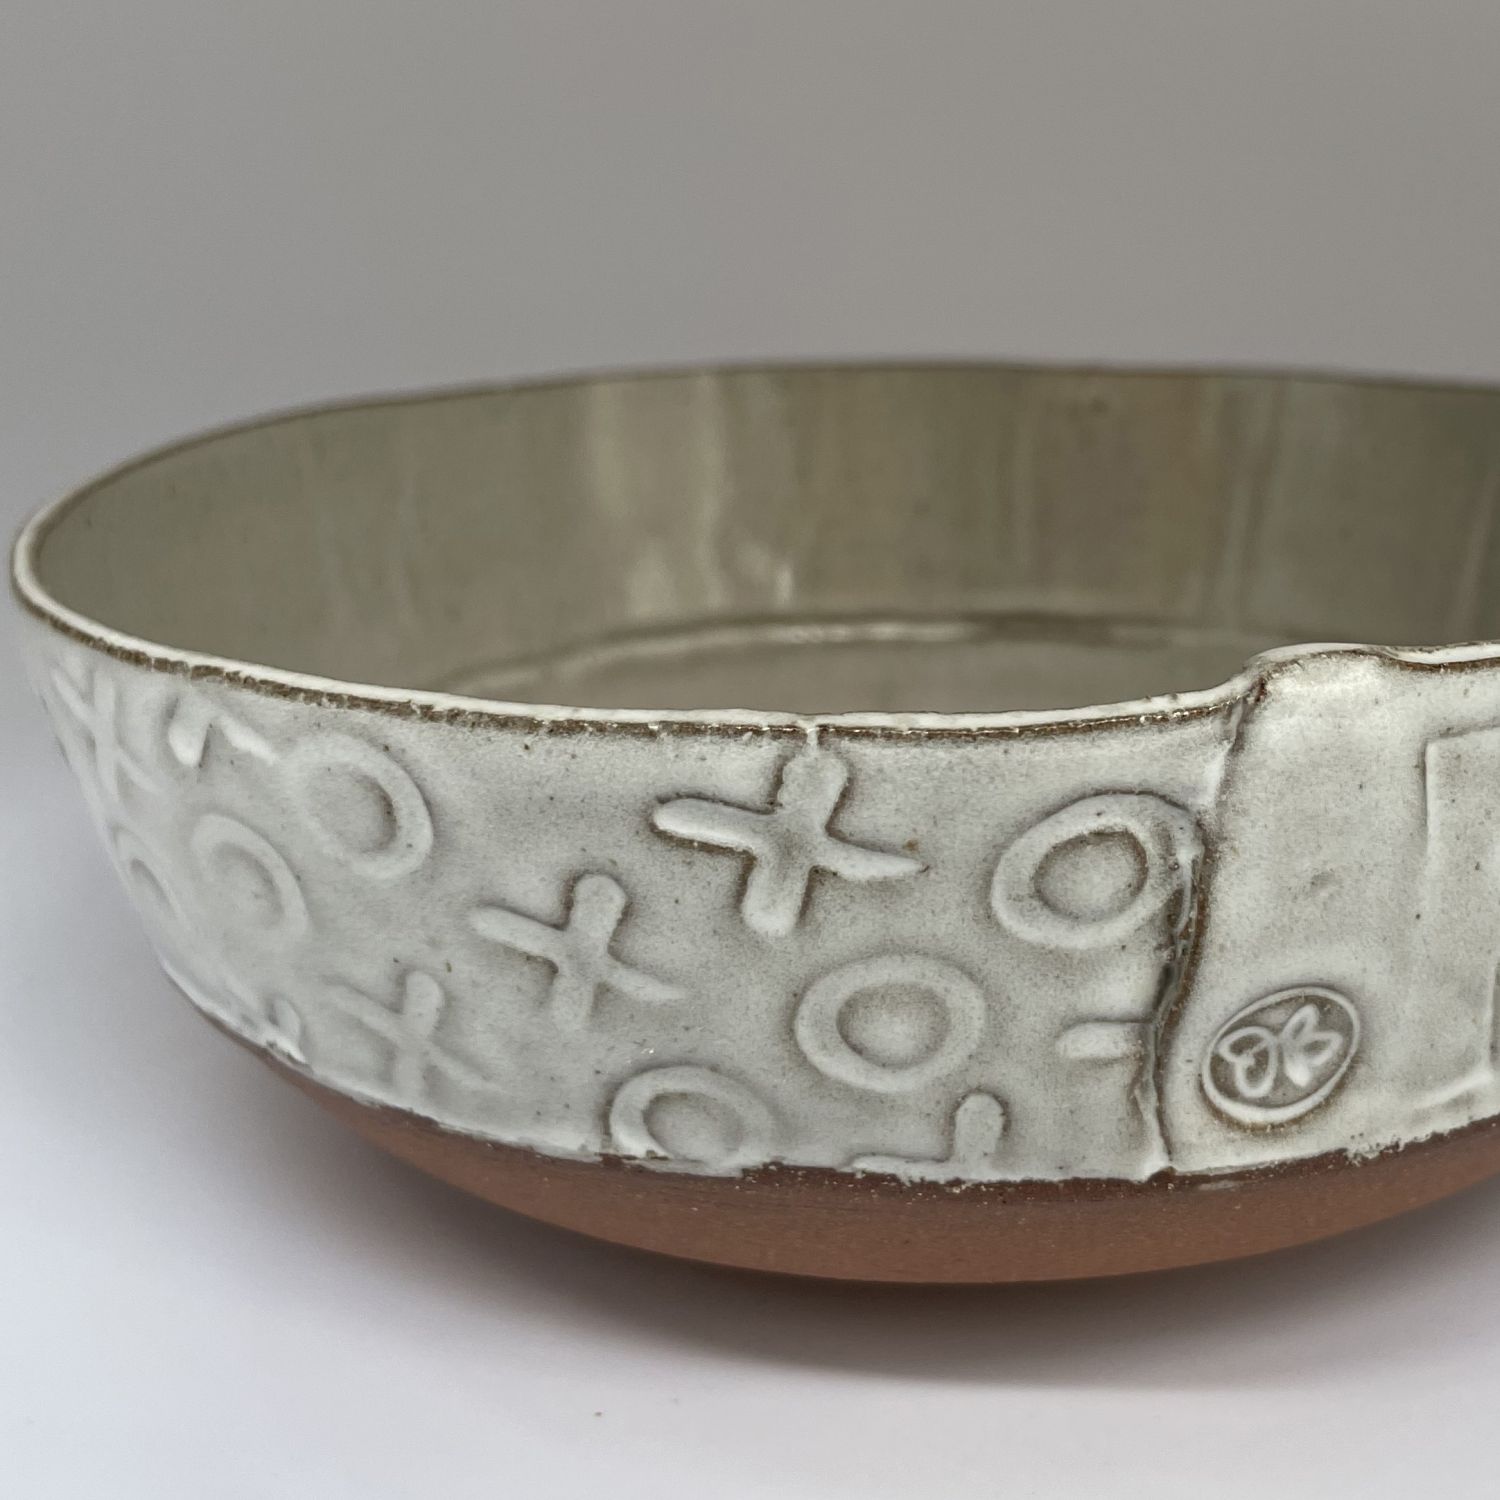 Juana Berinstein: Small Bowl – First of All I Love You Product Image 3 of 4